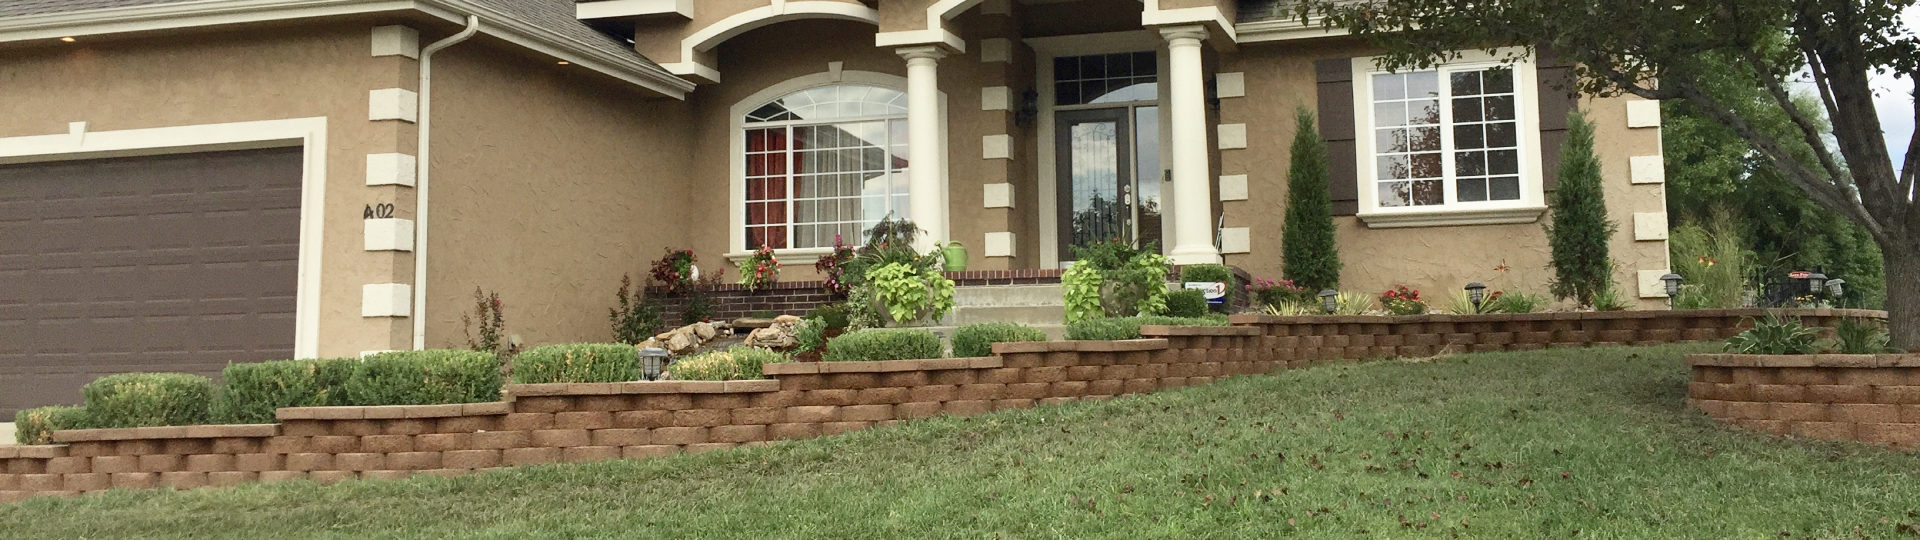 Landscaping Services - Hardscapes - Patios & Pavers